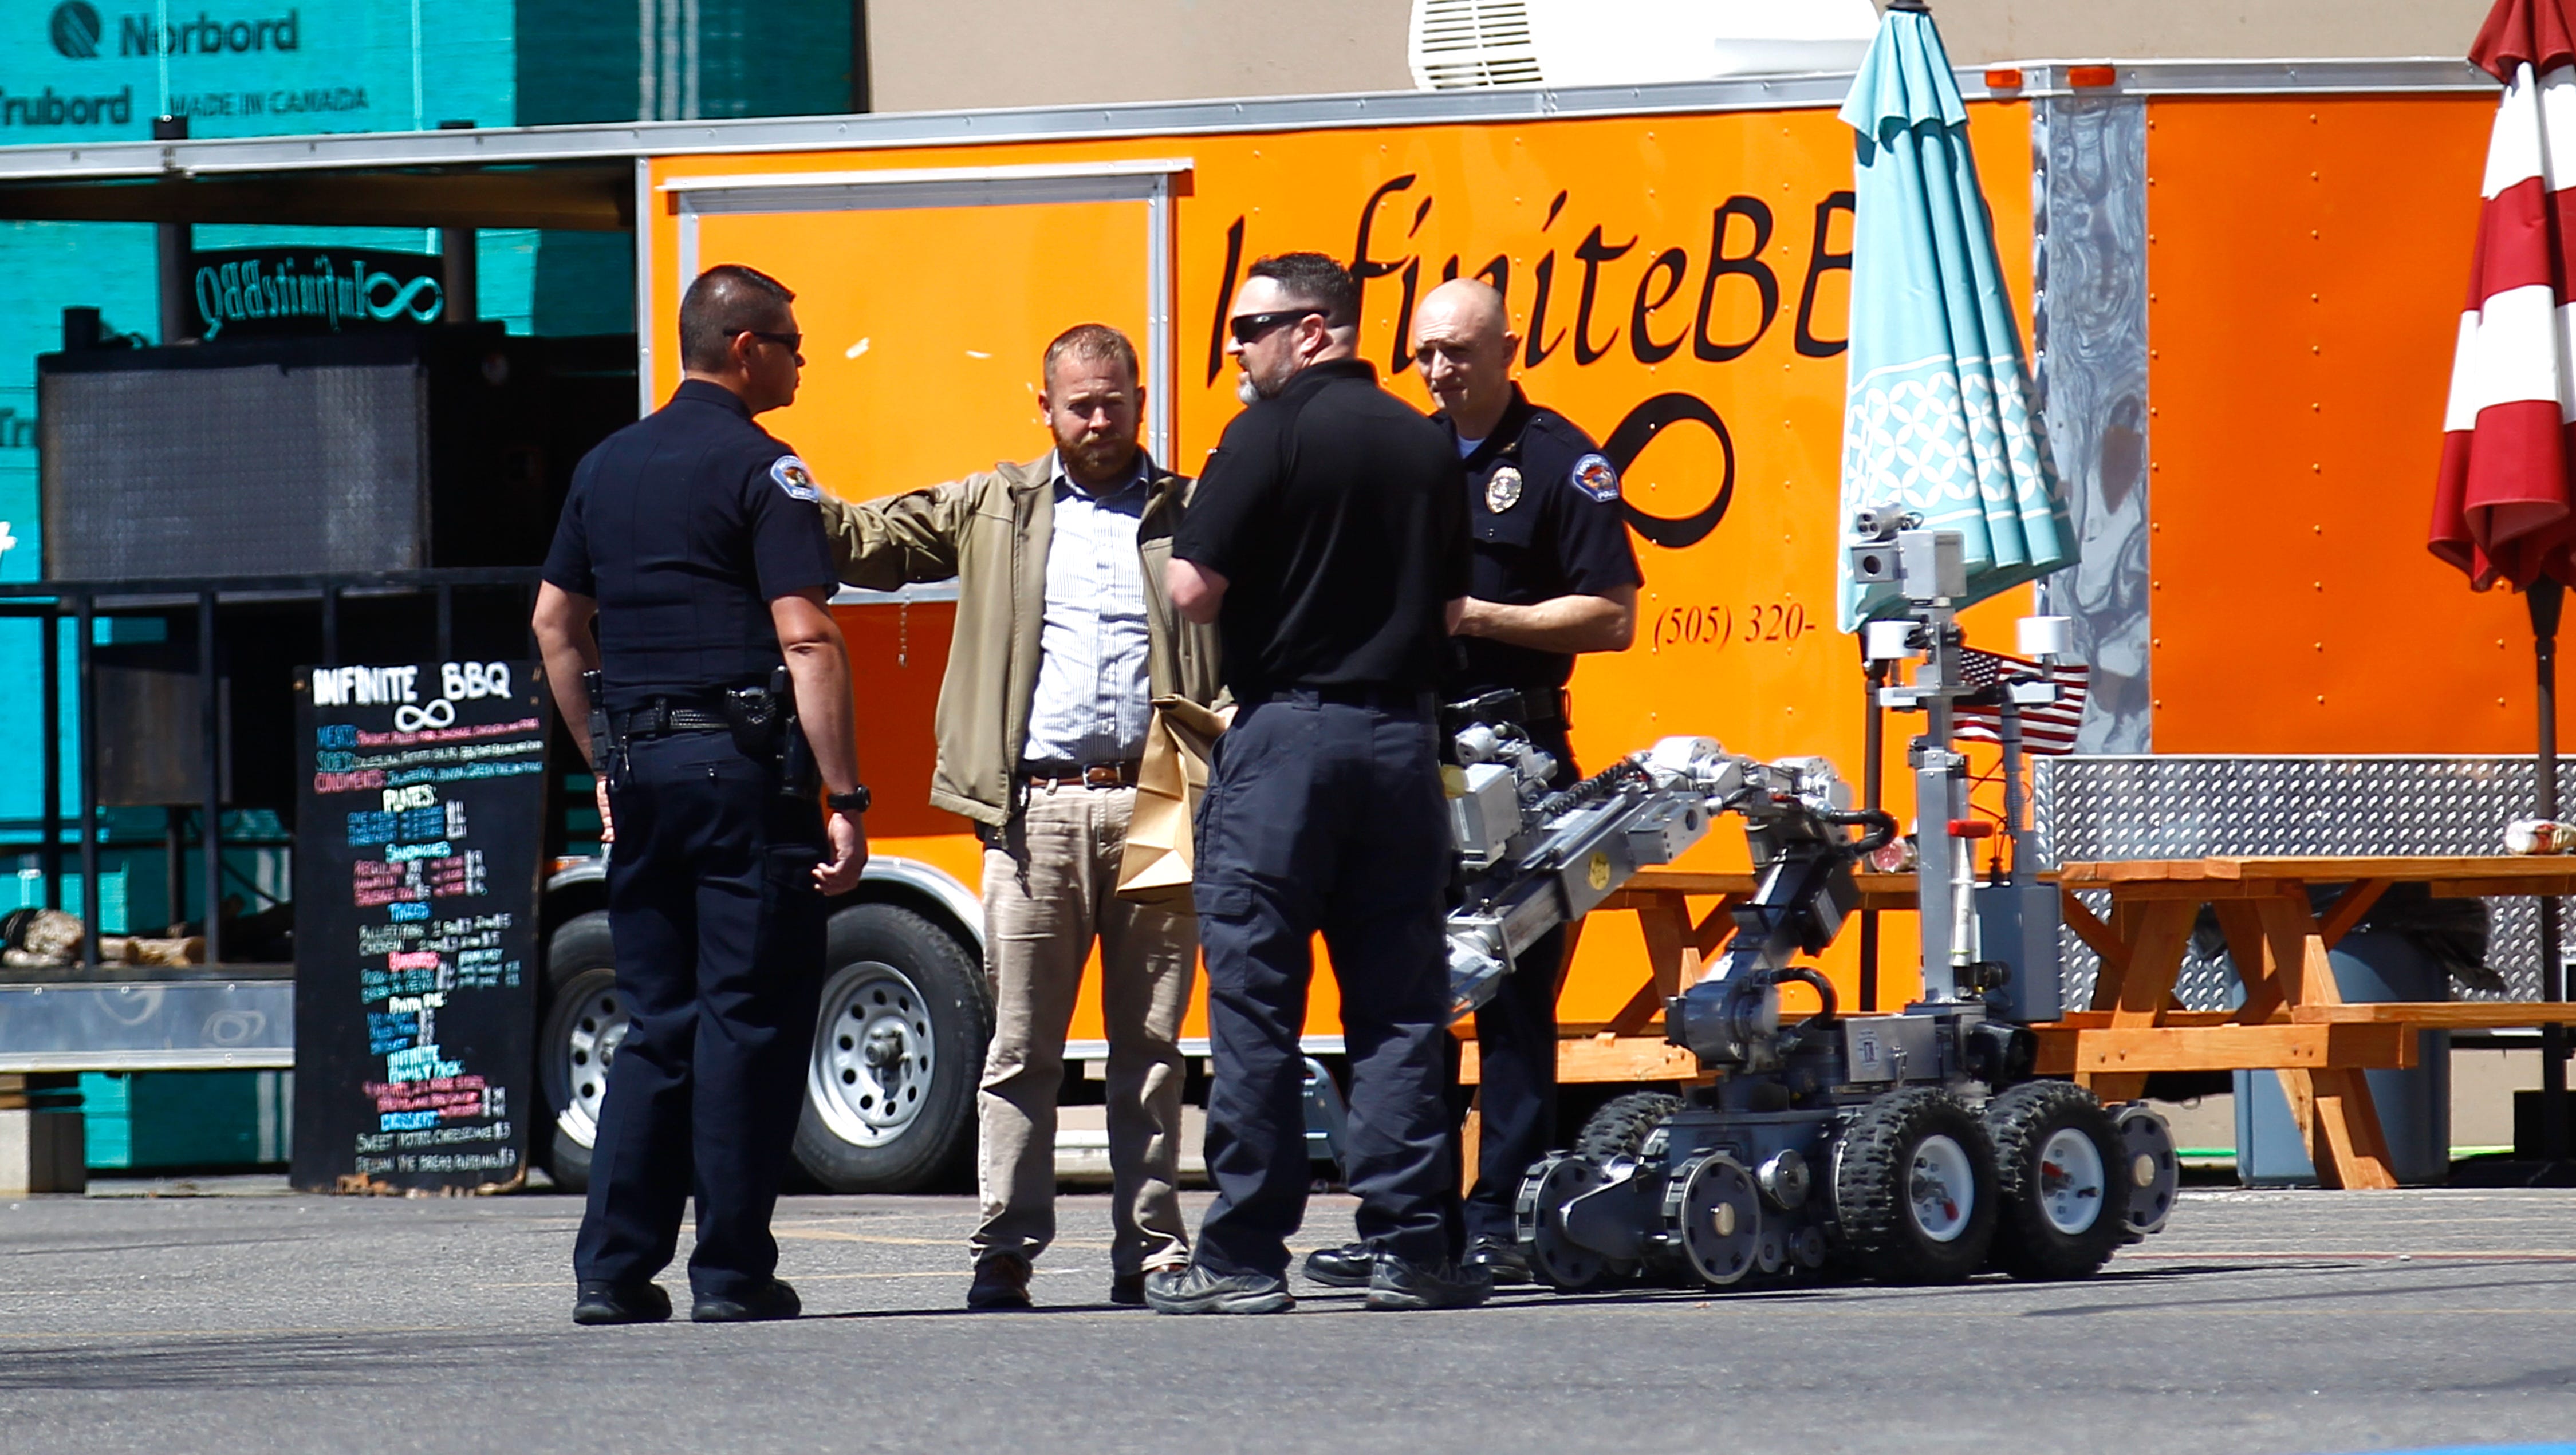 Farmington police officers investigate a suspicious package on Monday at Lowe's Home Improvement in Farmington.